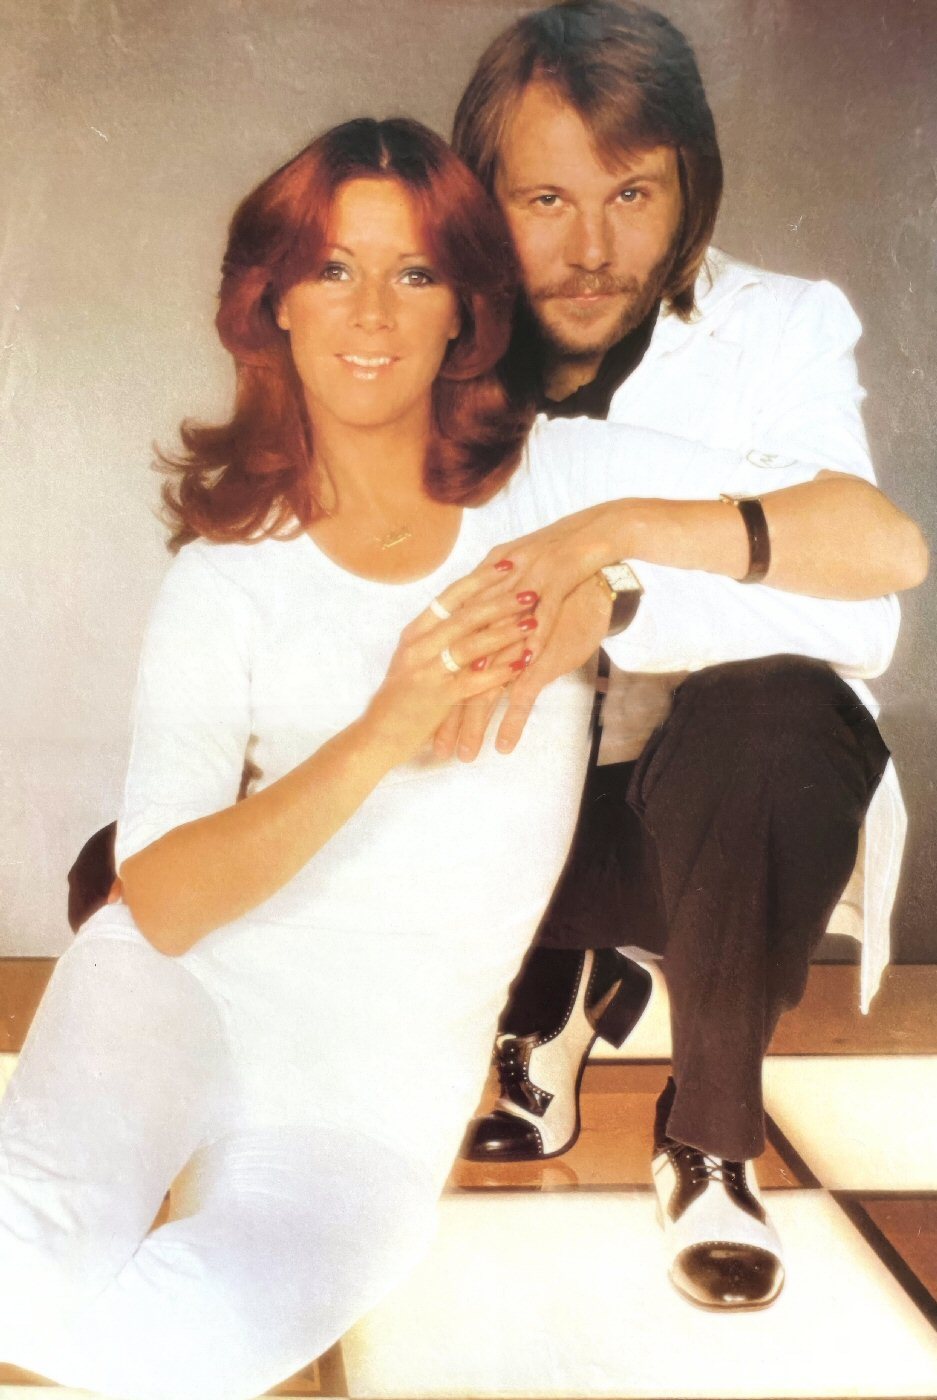 Star-crossed lovers – ABBA’s Anni-Frid Lyngstad and Benny Andersson in a 1977 photo session.